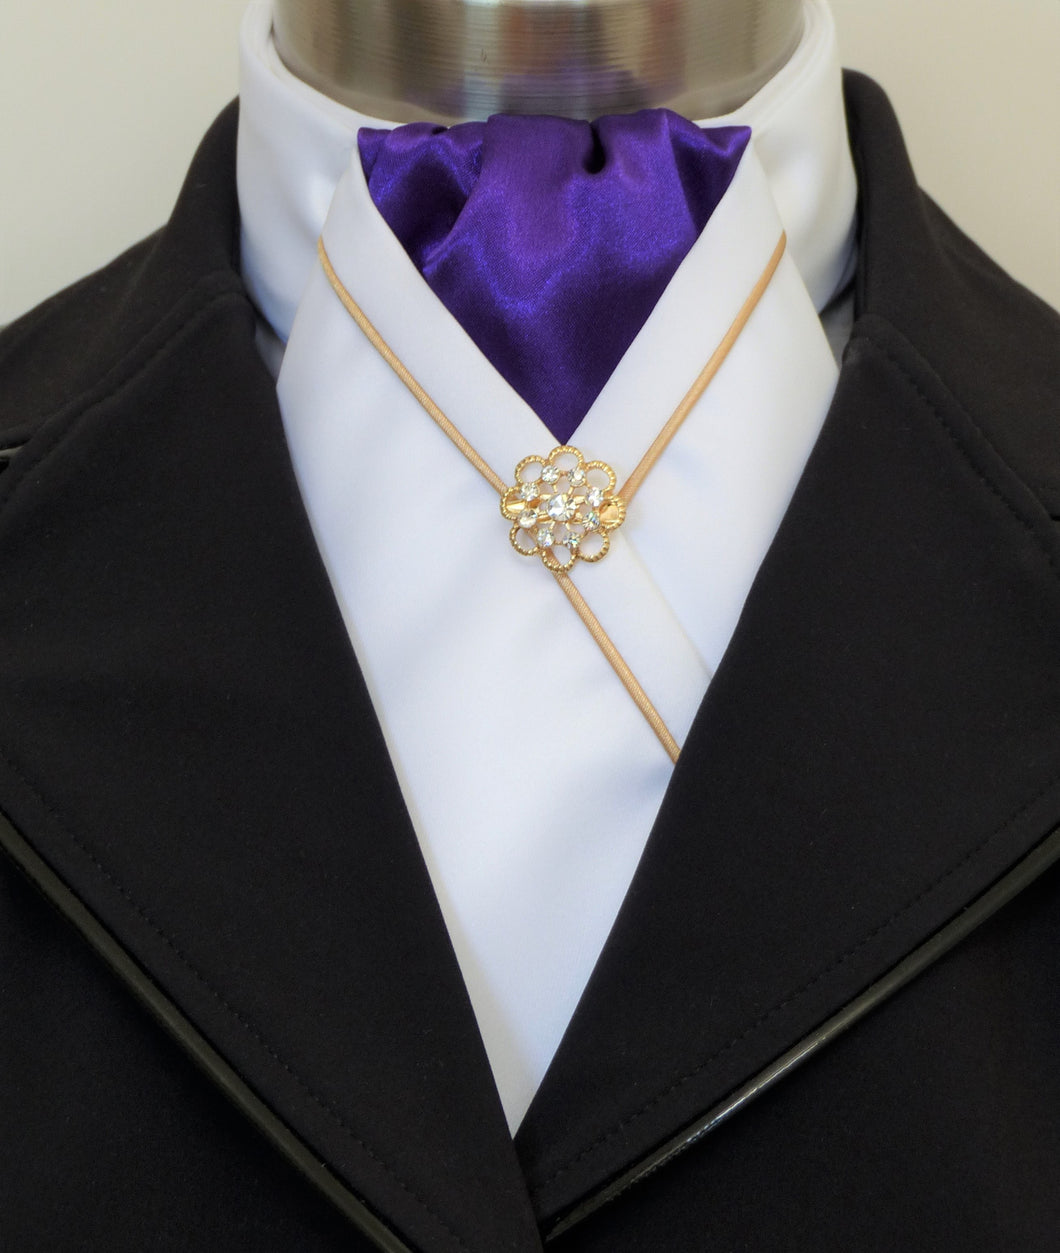 ERA KATE STOCK TIE - White satin, purple, gold satin piping and brooch